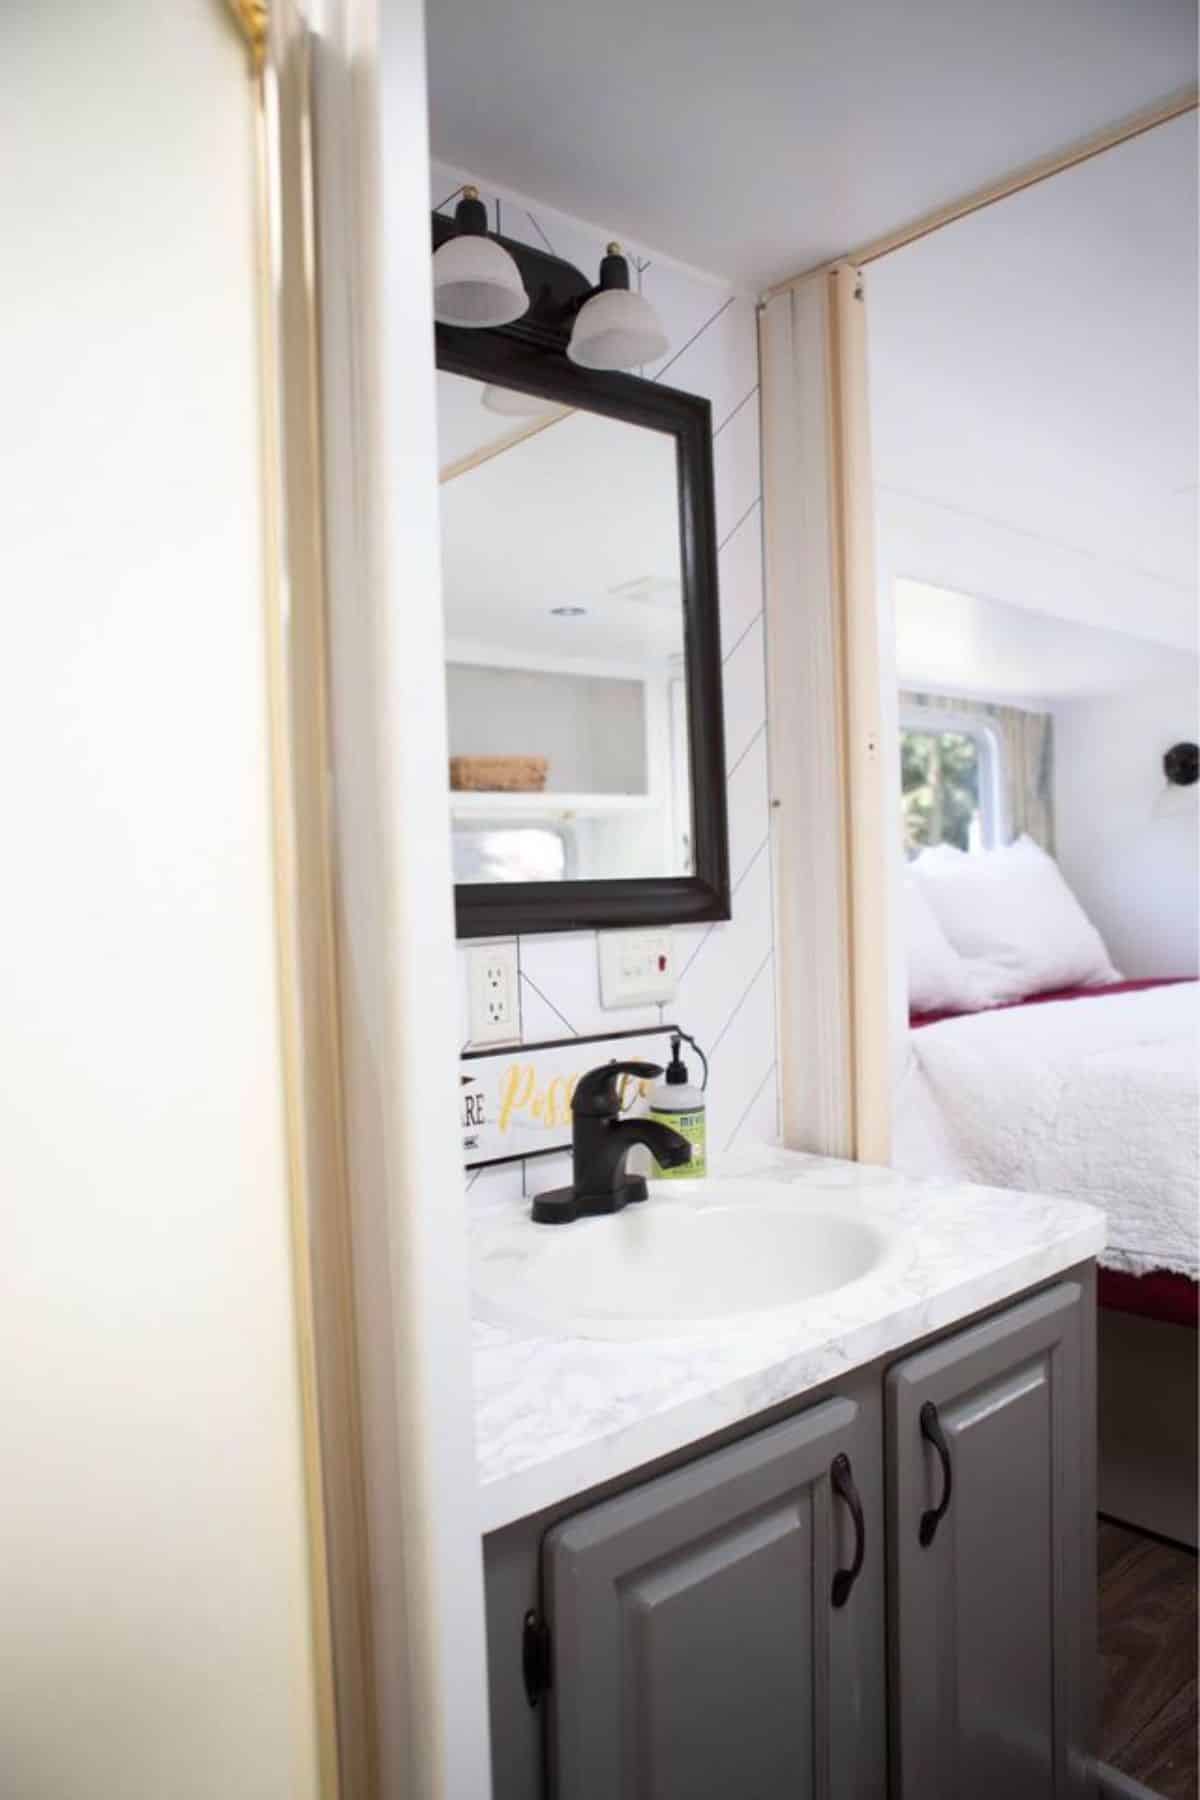 Sink with vanity and mirror in bathroom of 37’ Upgraded Tiny House